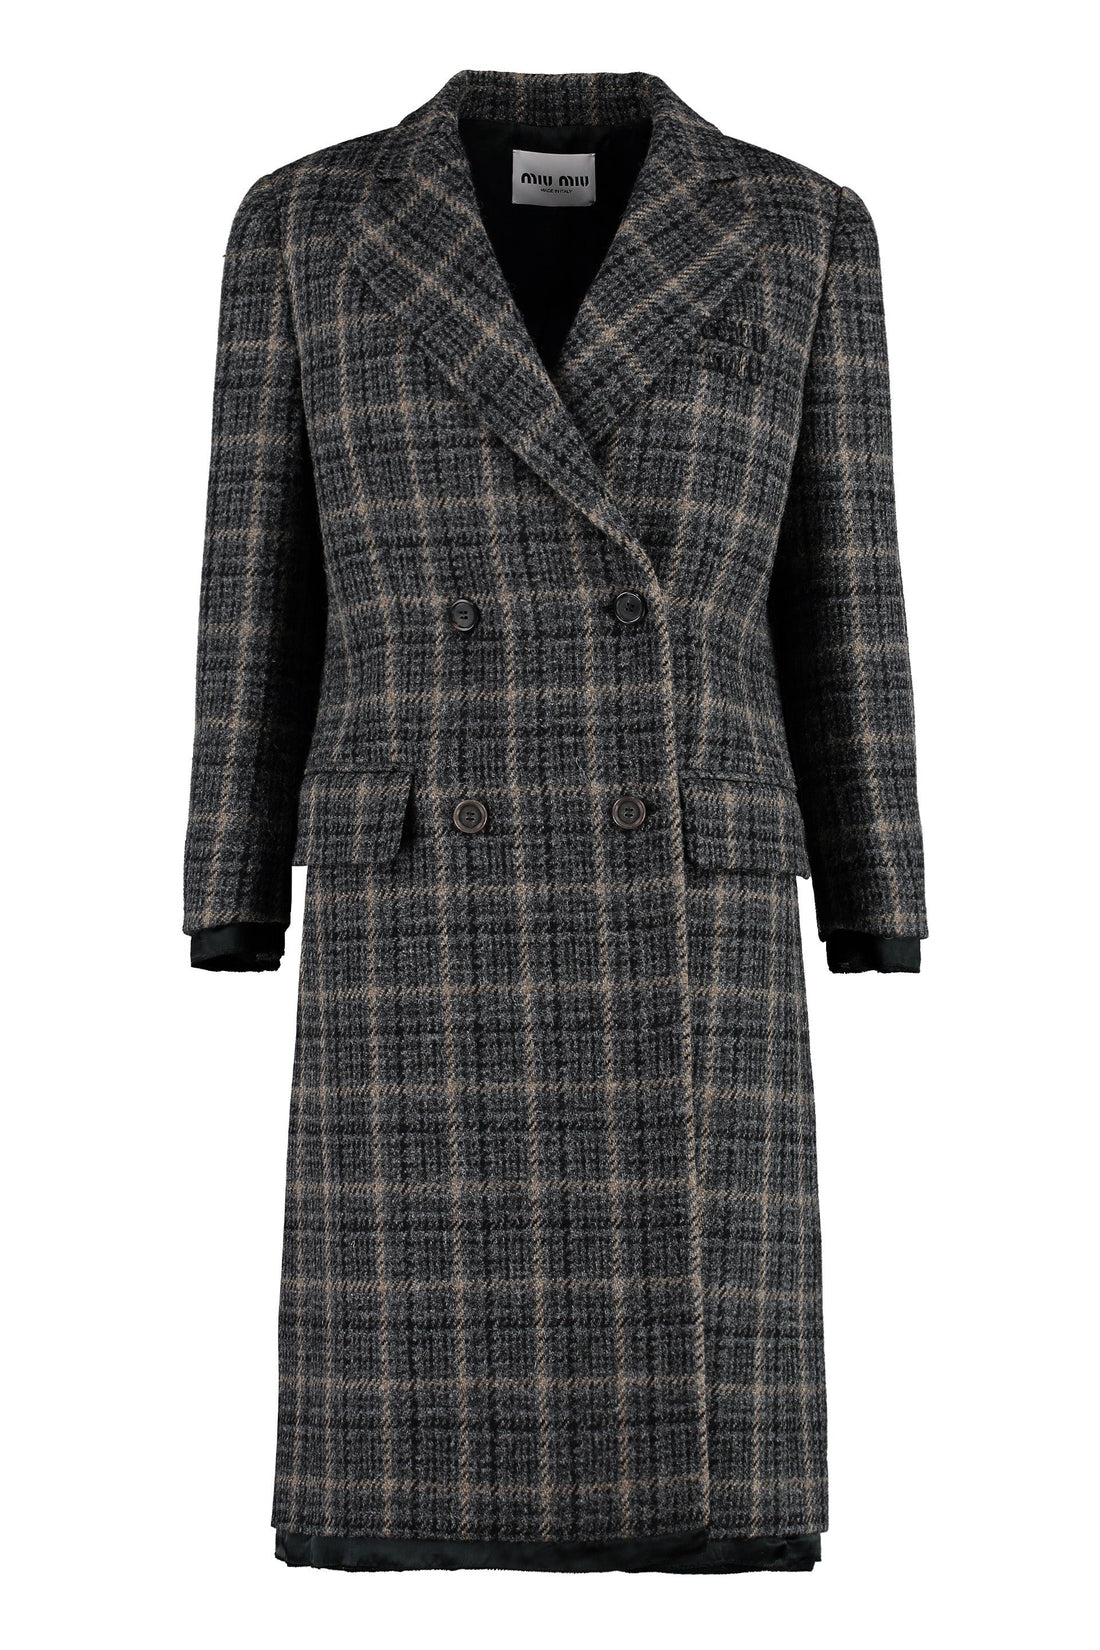 Miu Miu-OUTLET-SALE-Double-breasted wool coat-ARCHIVIST